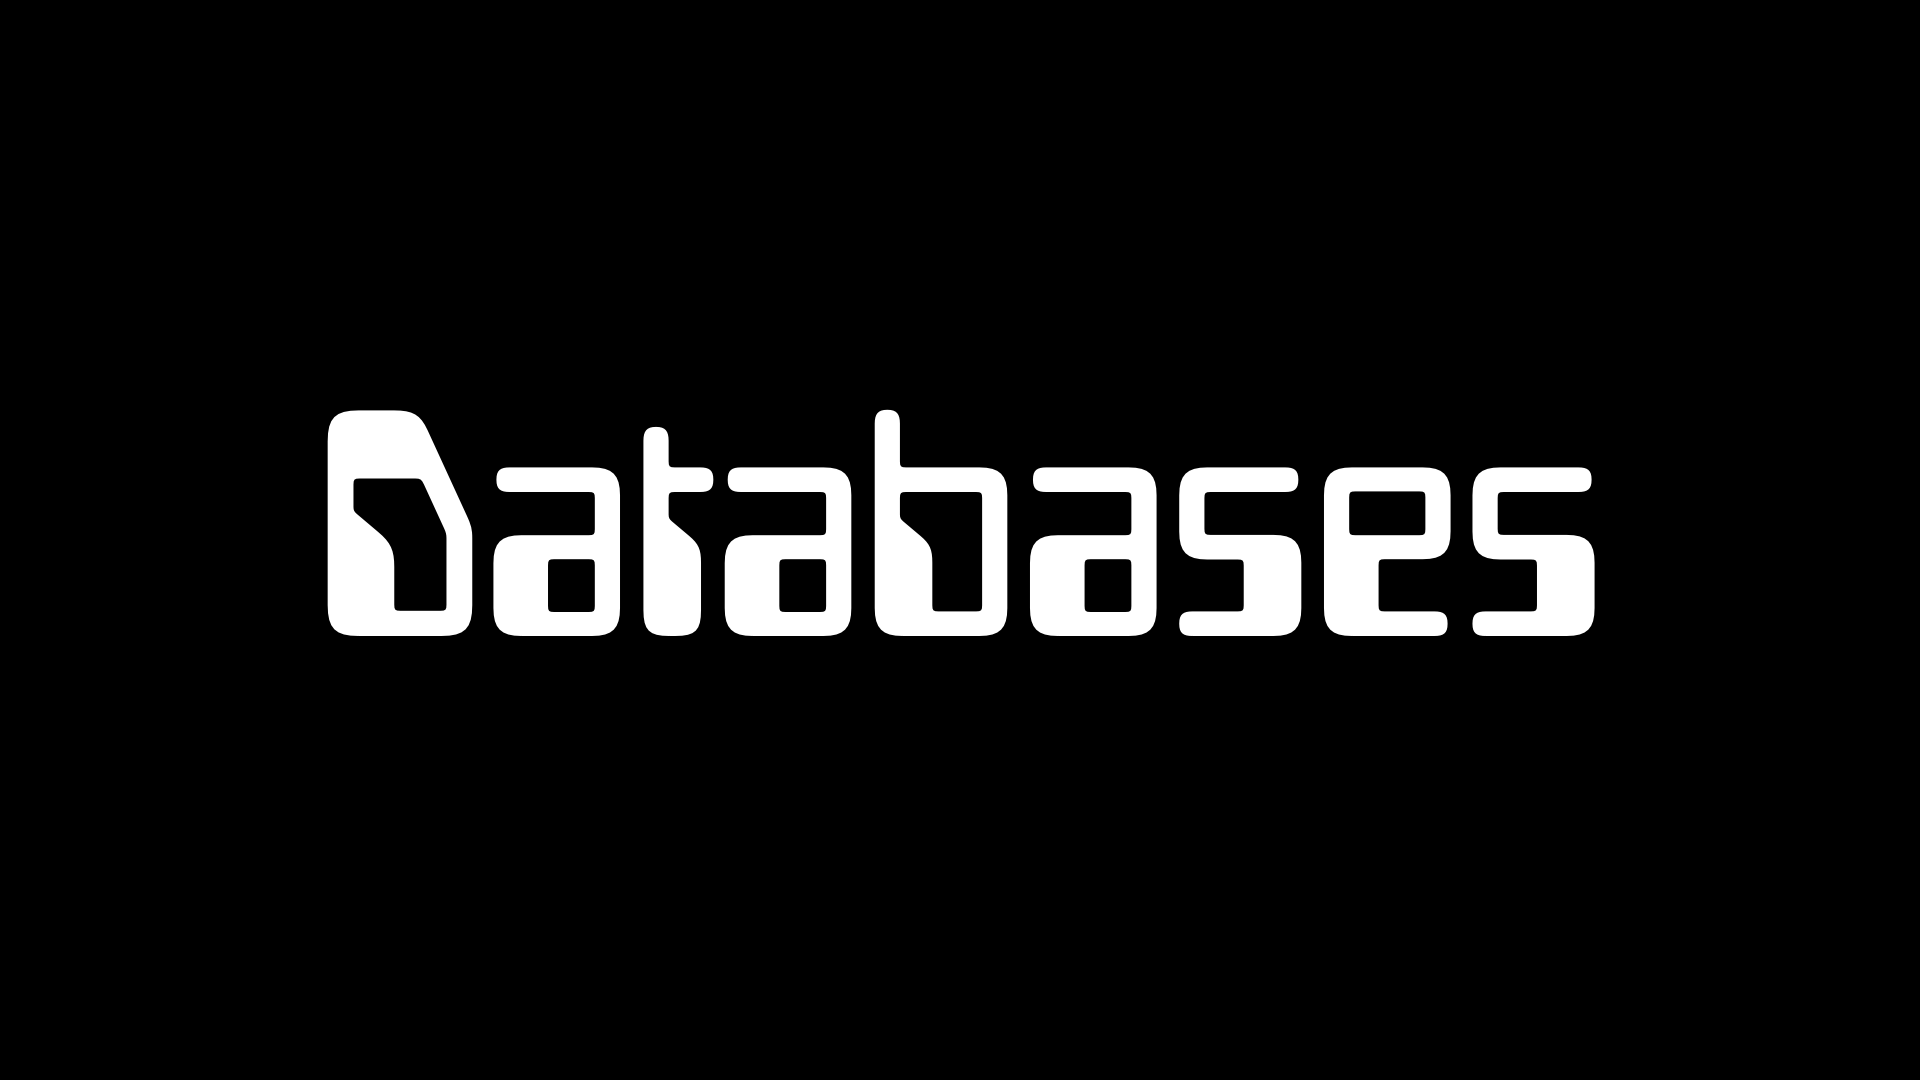 Title slide. Text reads “Databases”.